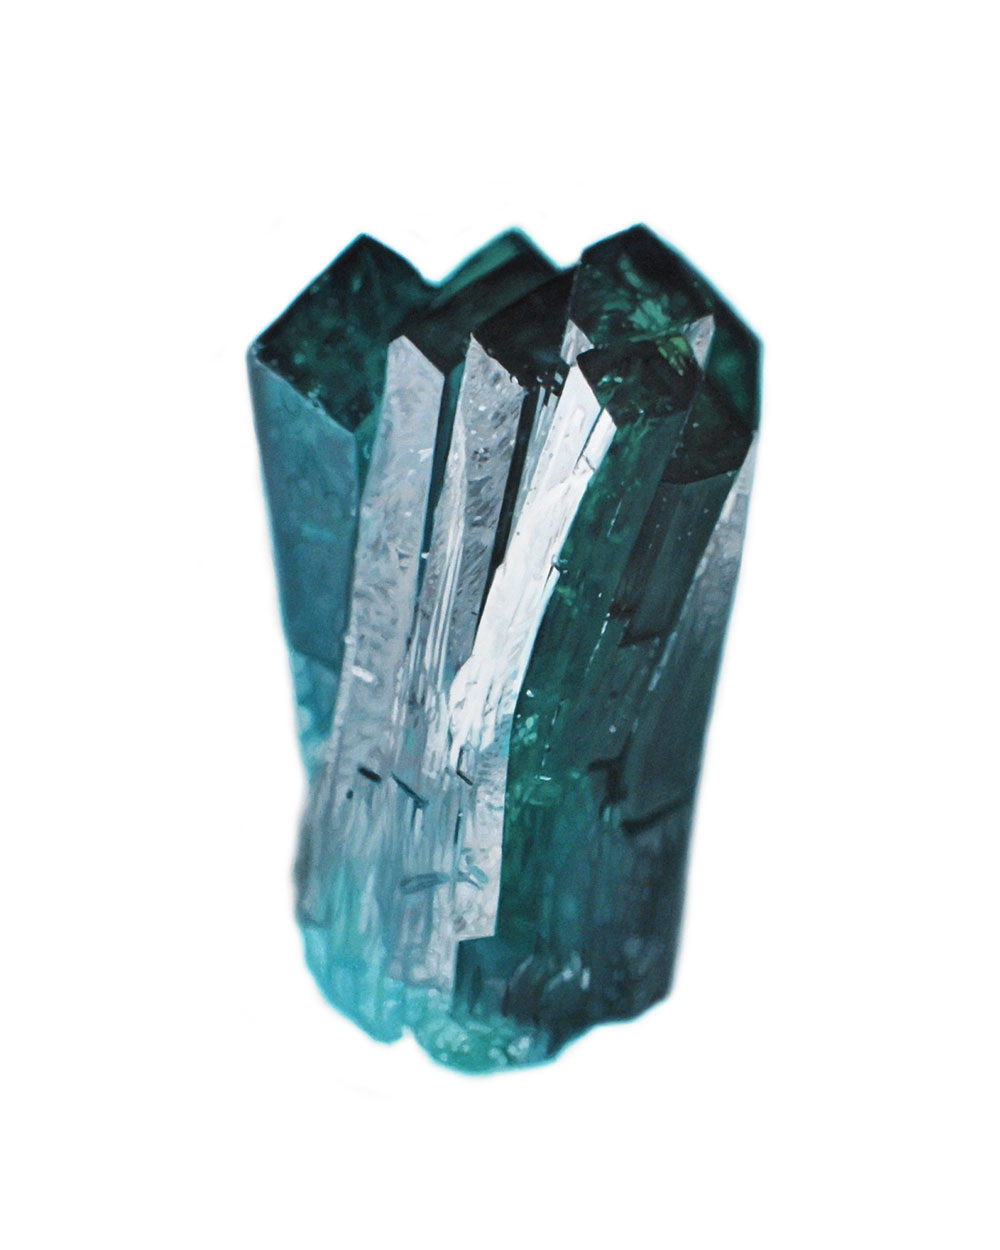 Hyper Realistic Paintings Of Crystals And Minerals By Carly Waito 2